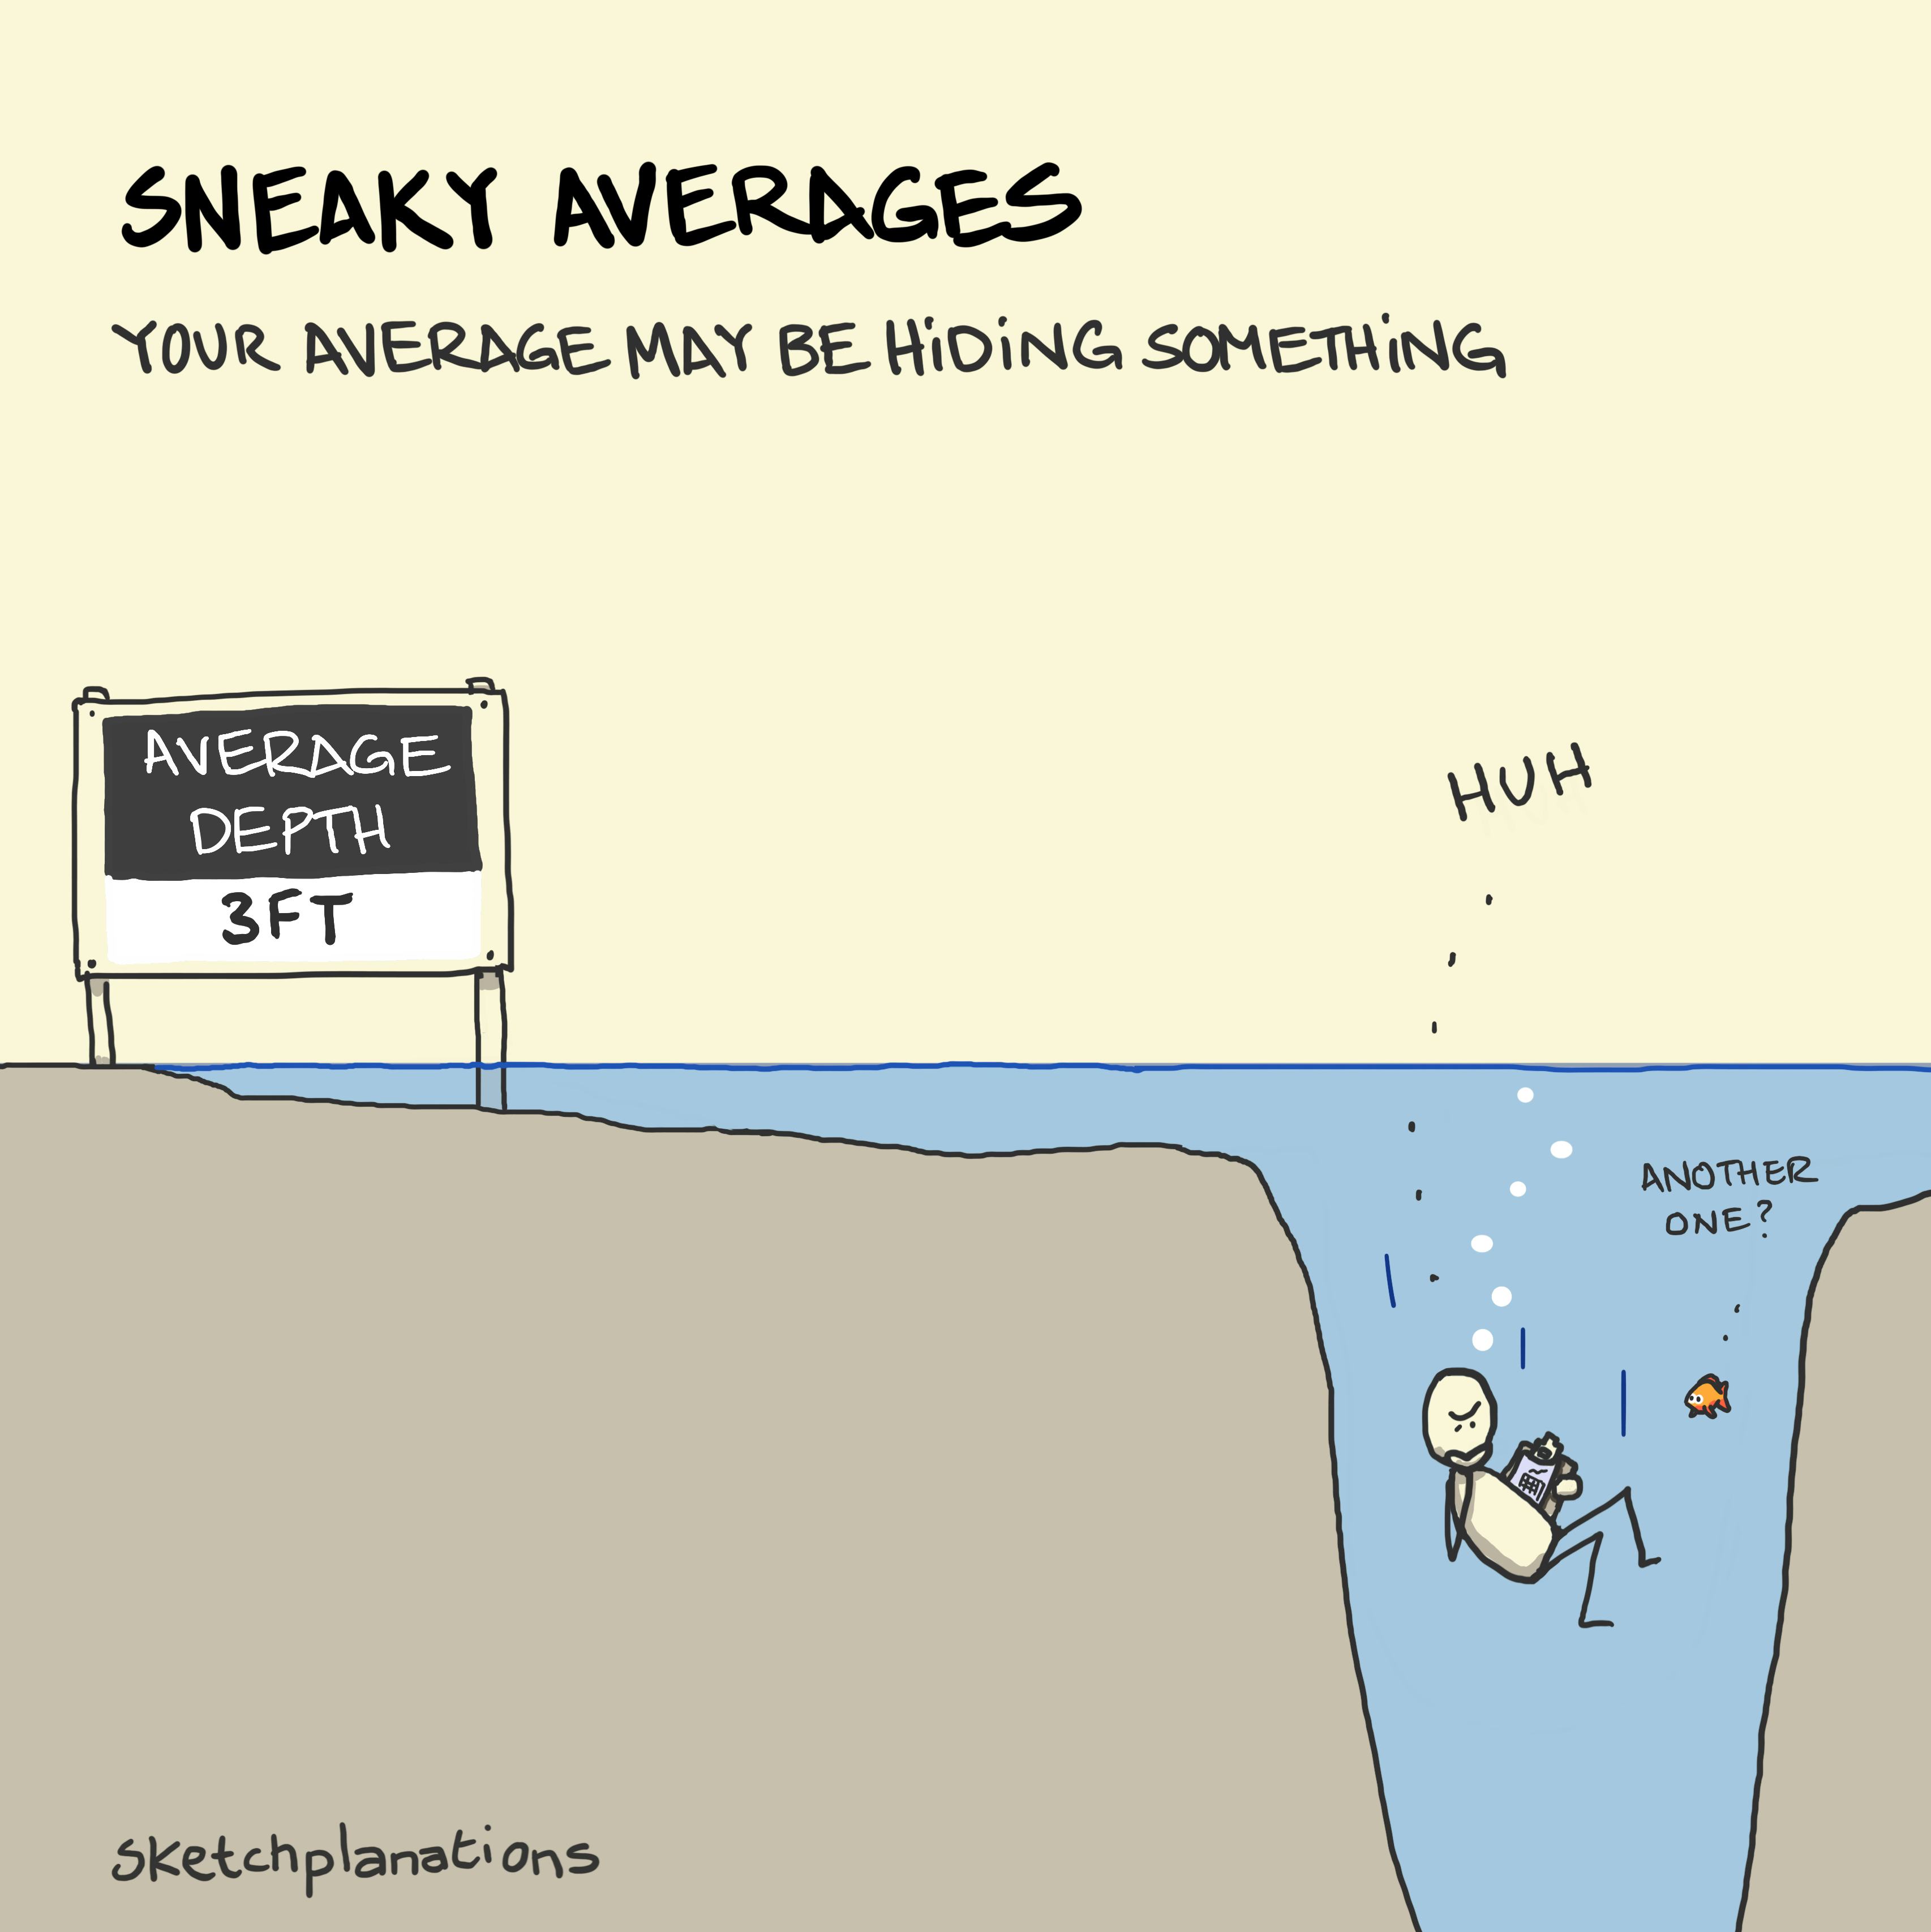 Sneaky averages: A statistician sinking in the deep part of a pond by a sign saying the average depth is 3ft